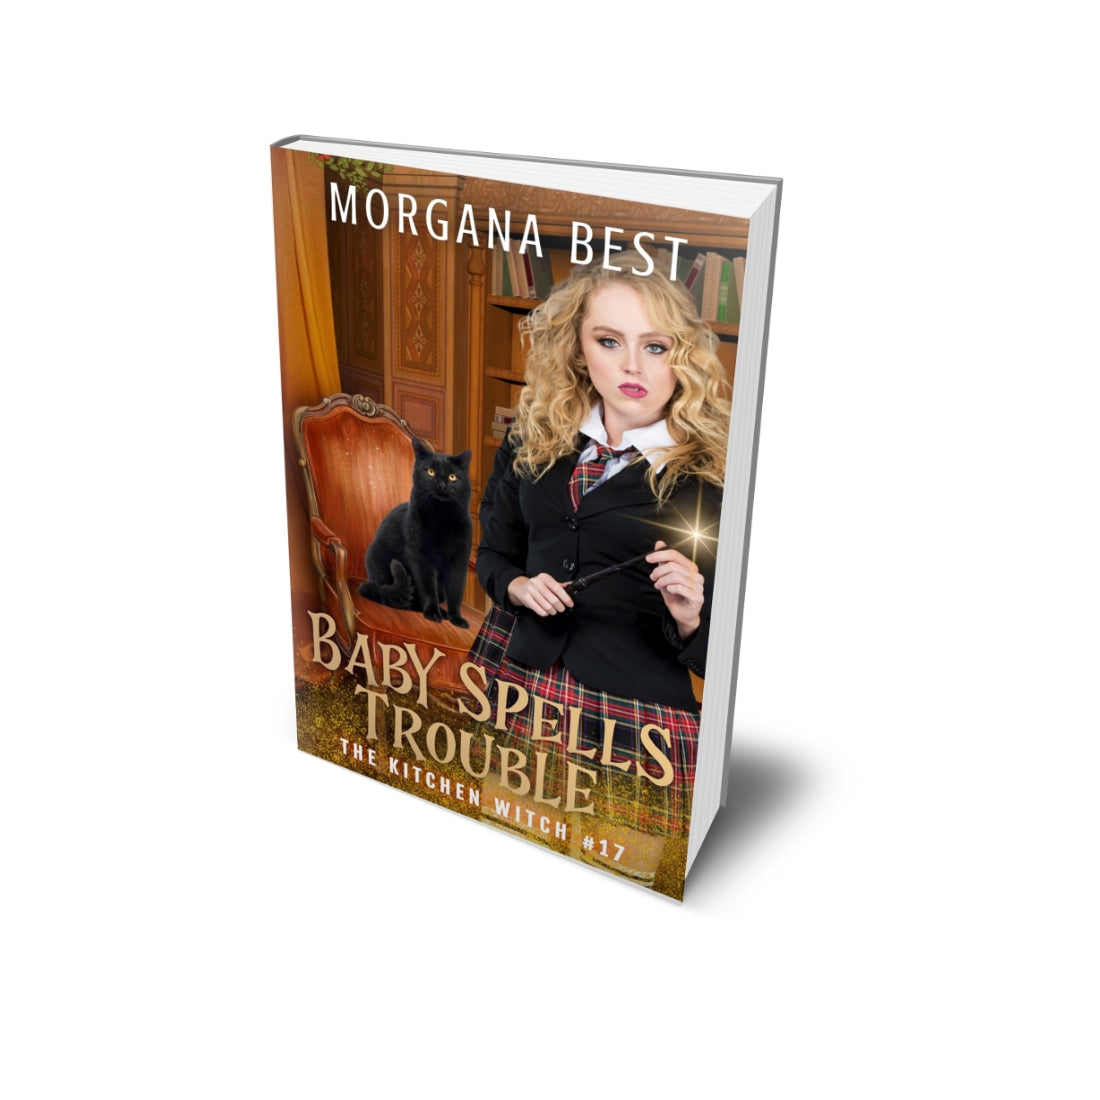 Baby Spells Trouble paperback cozy mystery morgana best